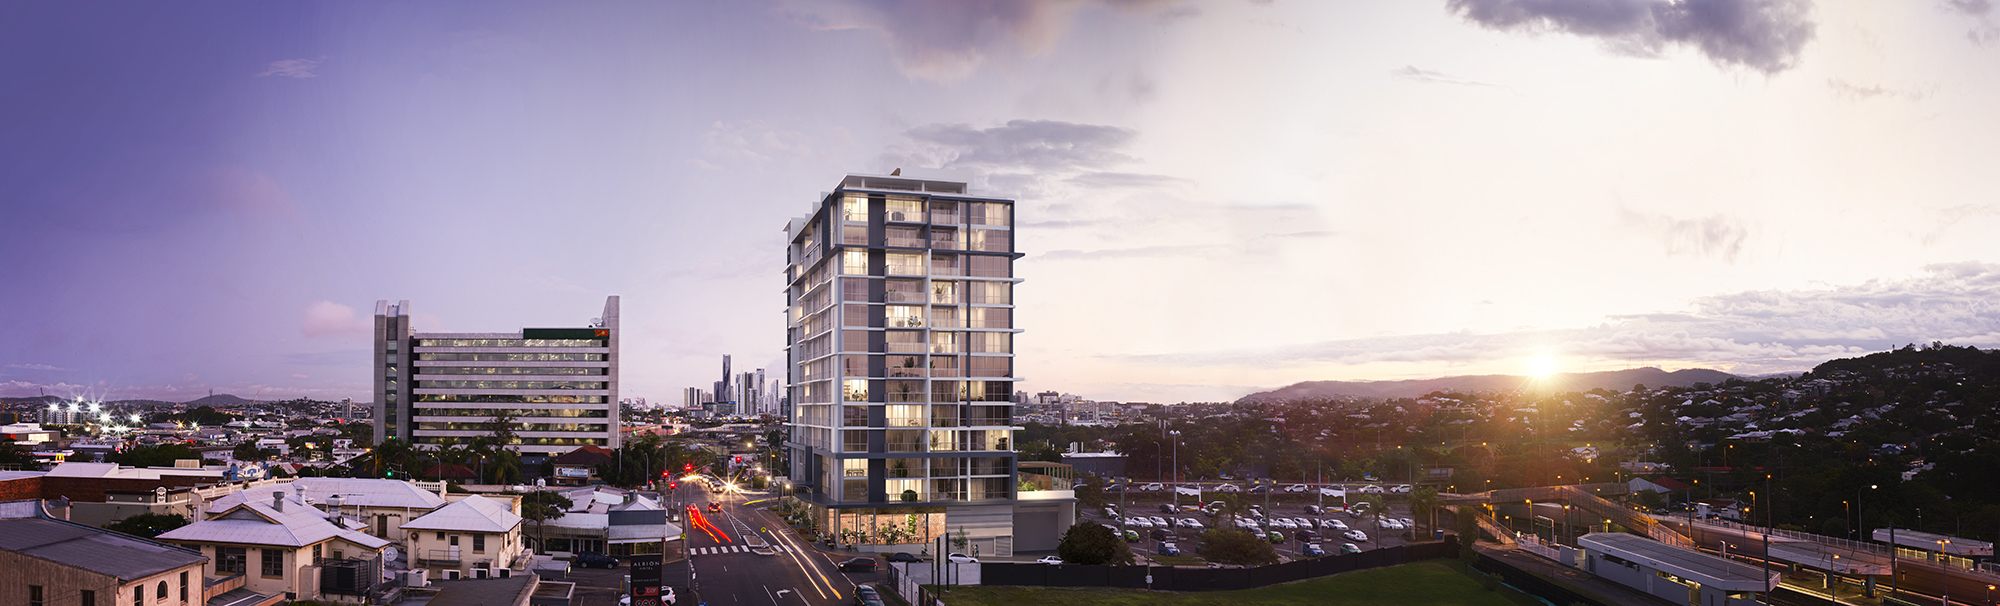 Mid-rise apartment building in Brisbane located adjacent to a train station at sunset, captured from an elevated perspective to showcase its contextual relationships.